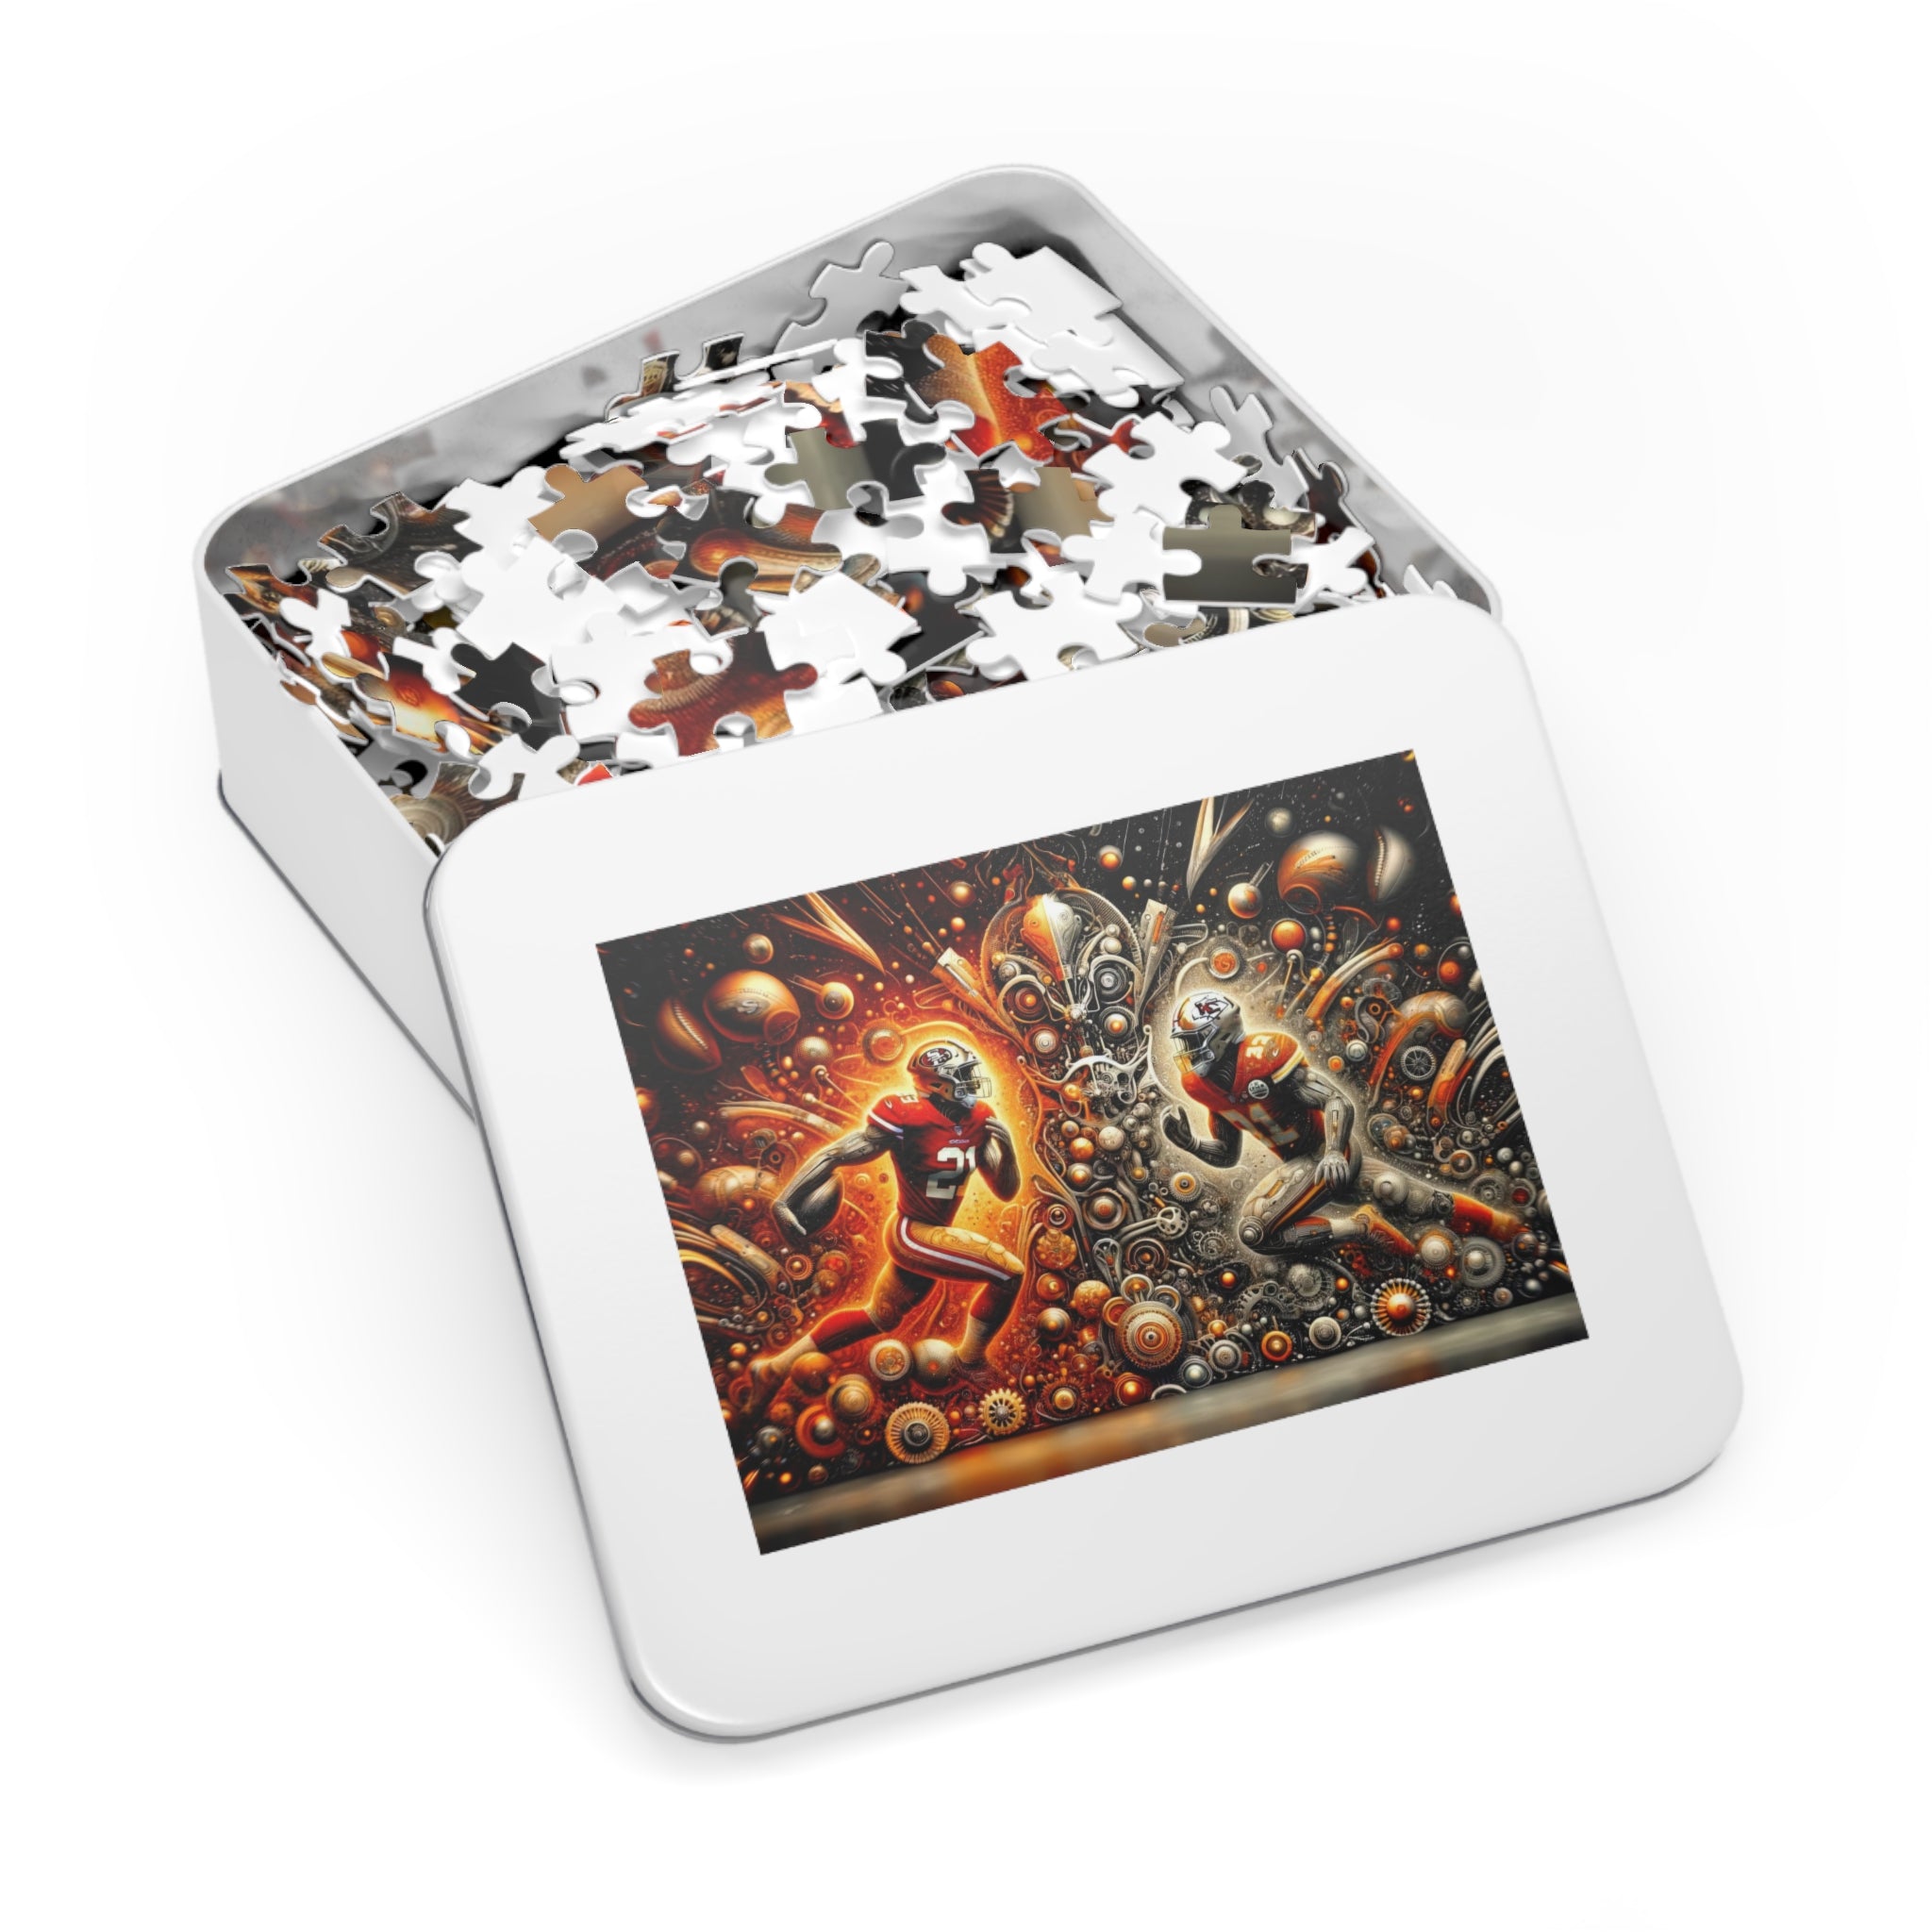 Ironclad Rivals Jigsaw Puzzle